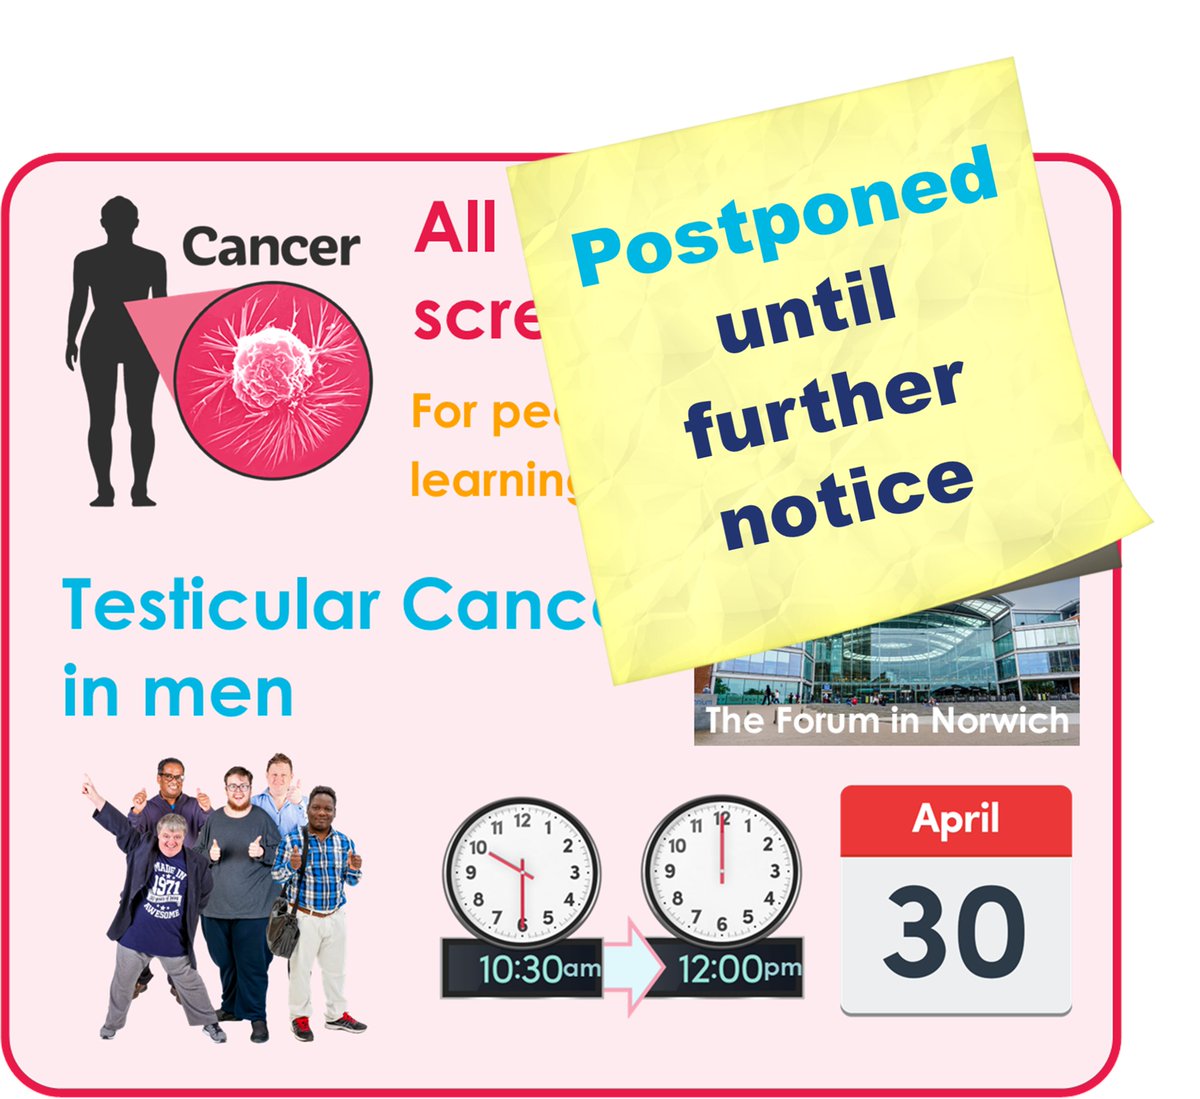 We have had to postpone our event about testicular cancer screening we will let you know the new date when we know it!